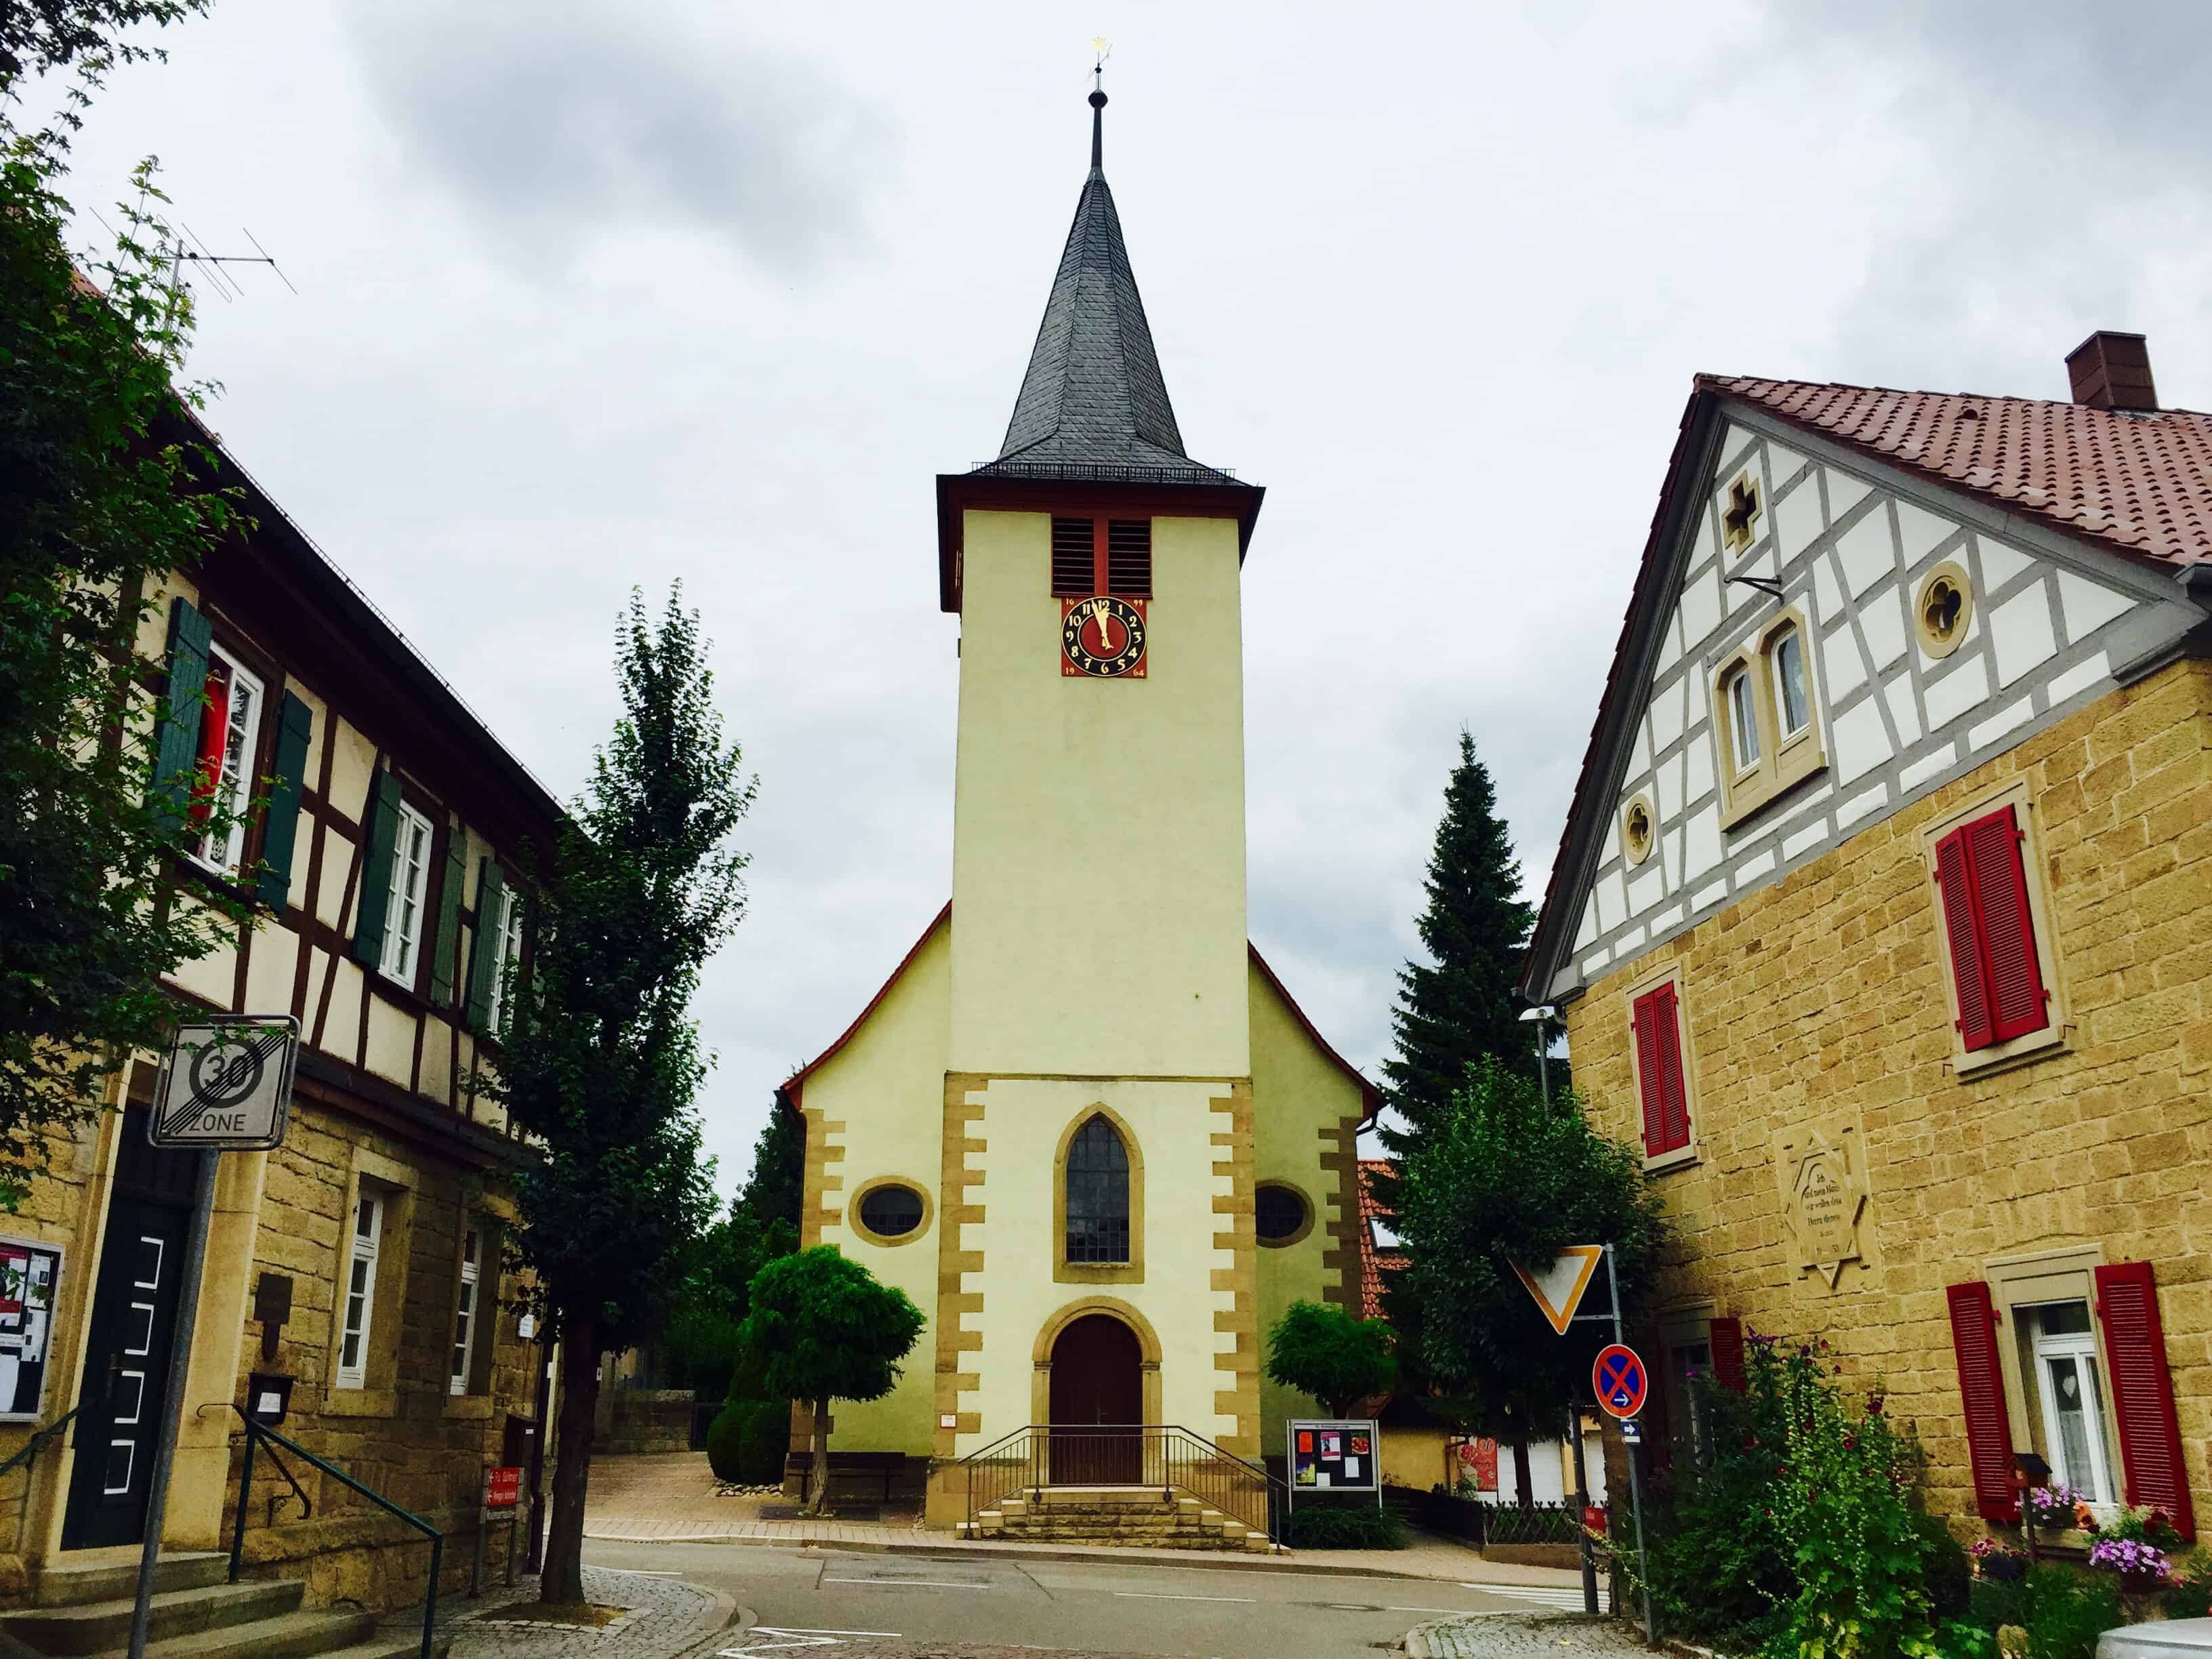 Waldensians, Waldensian churches, grossvillars, south west germany